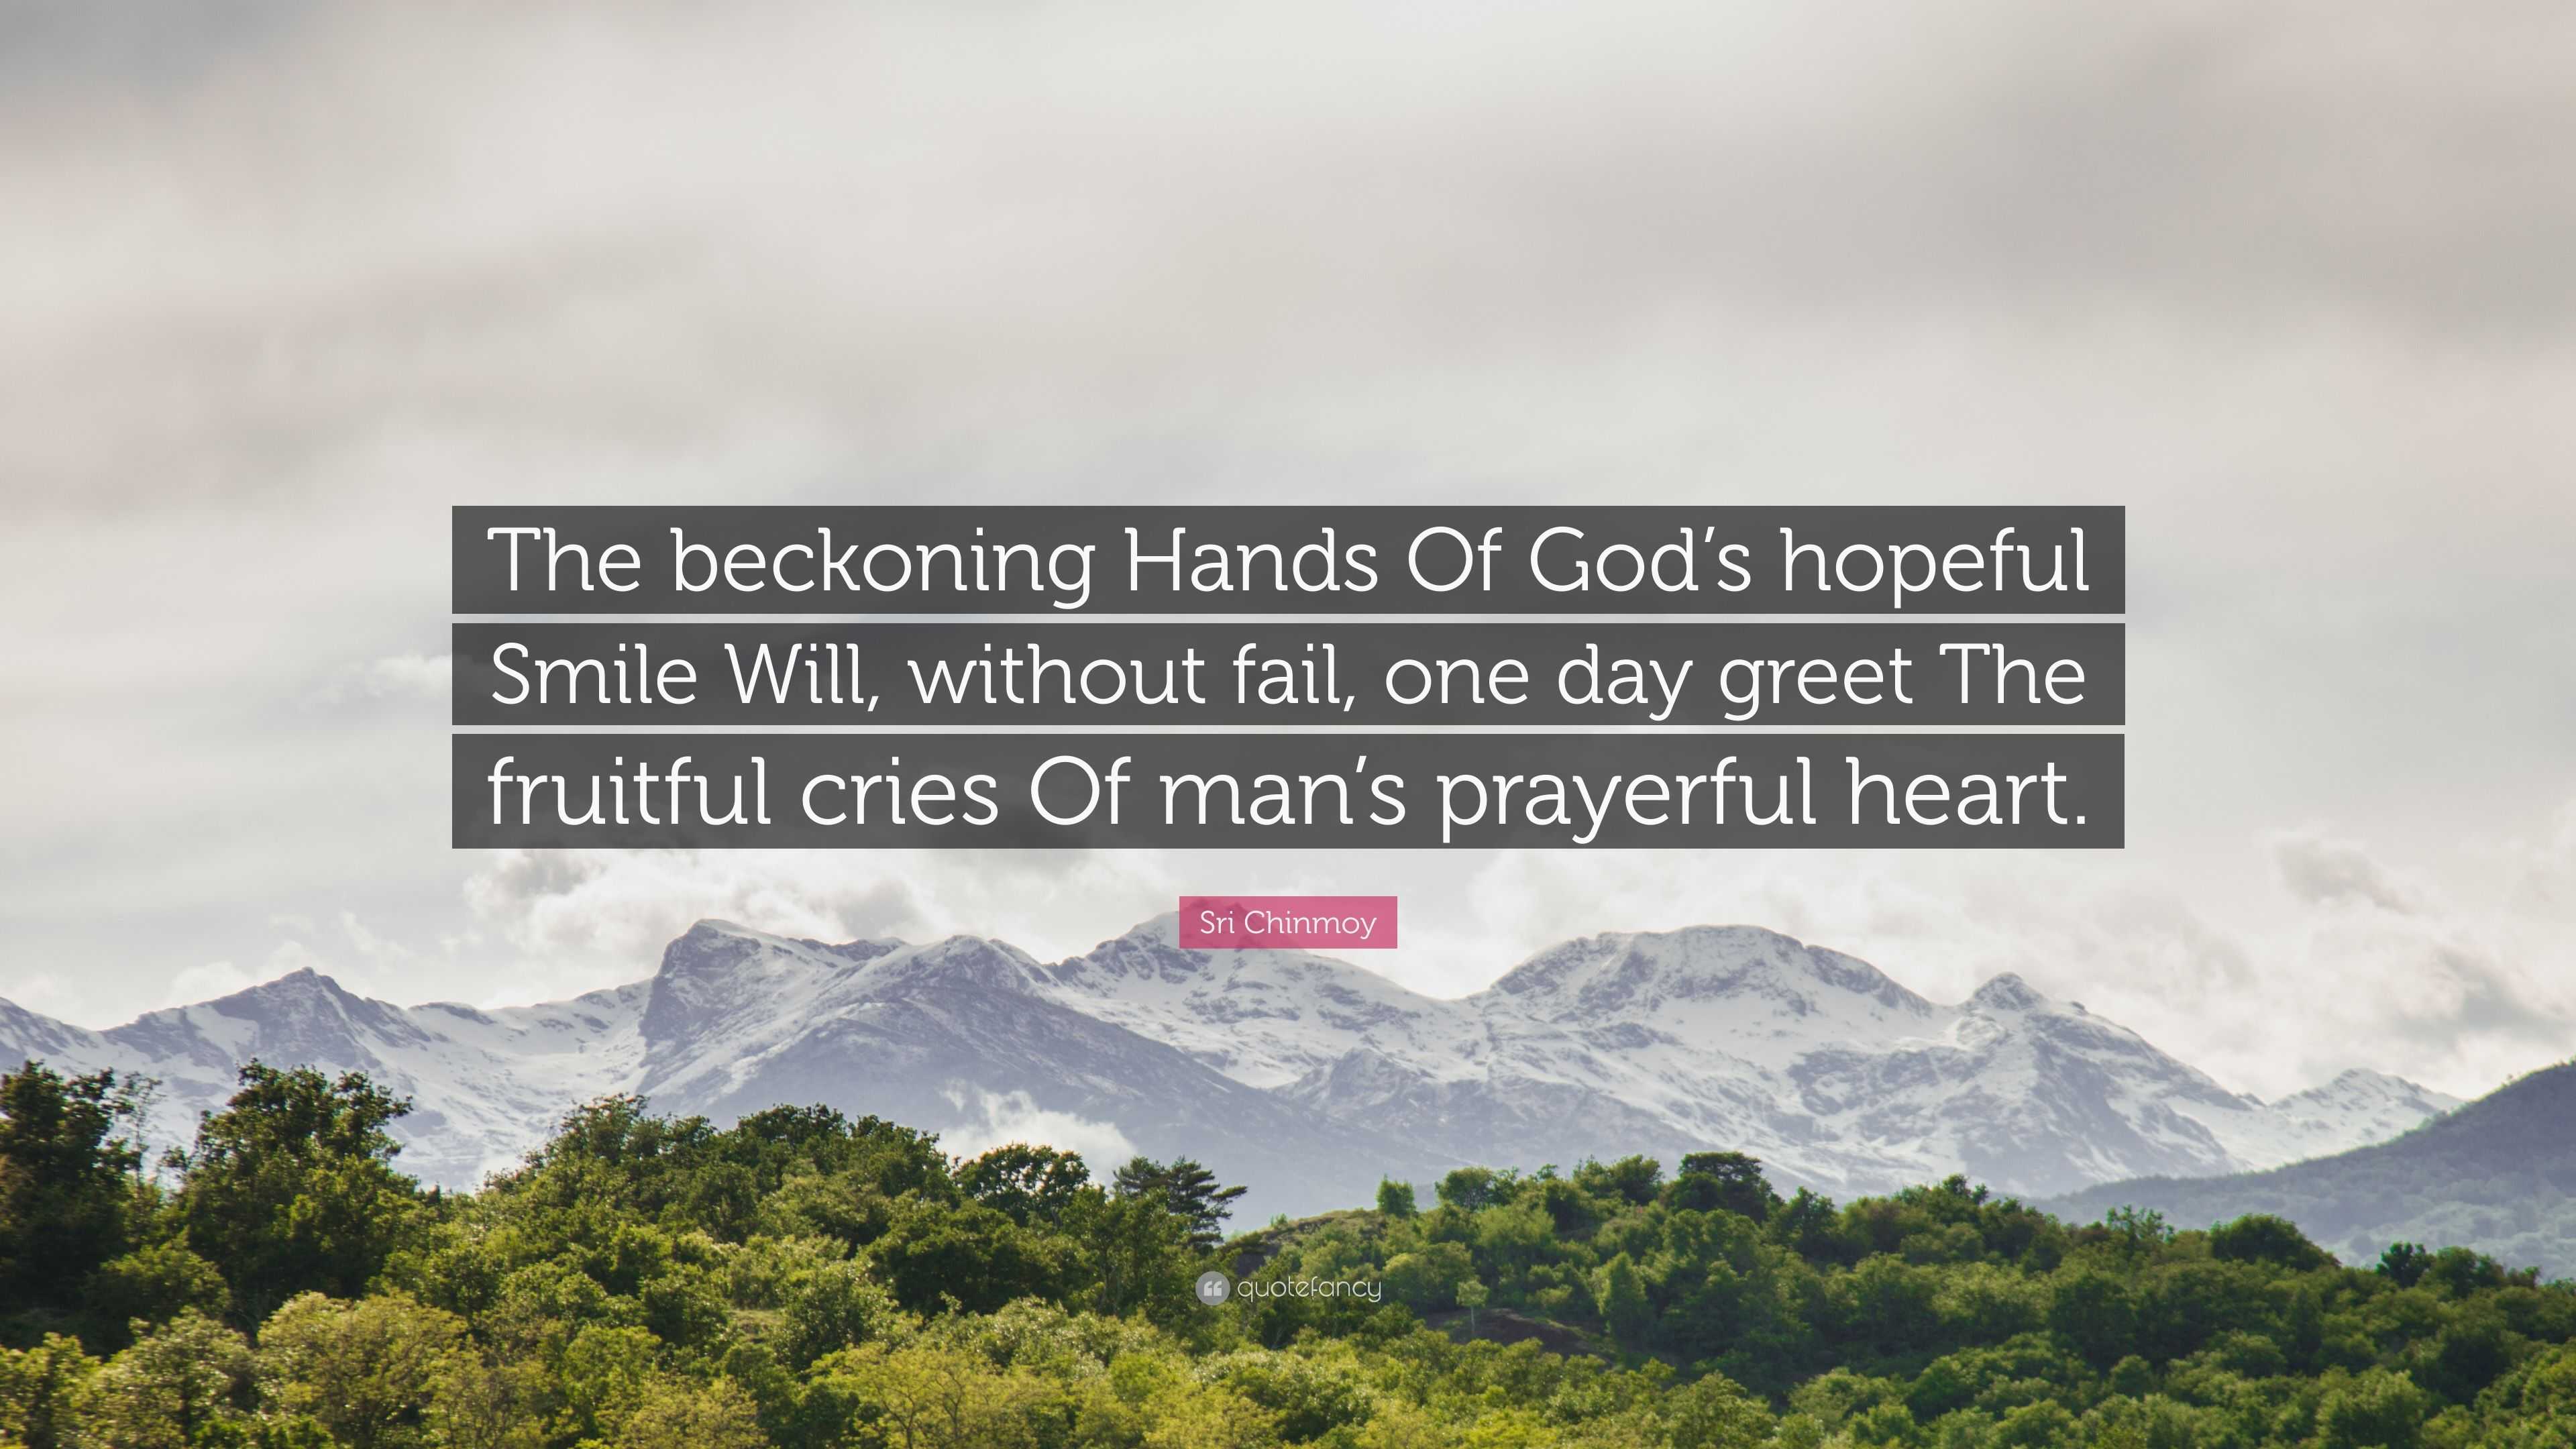 Sri Chinmoy Quote: “The beckoning Hands Of God's hopeful Smile